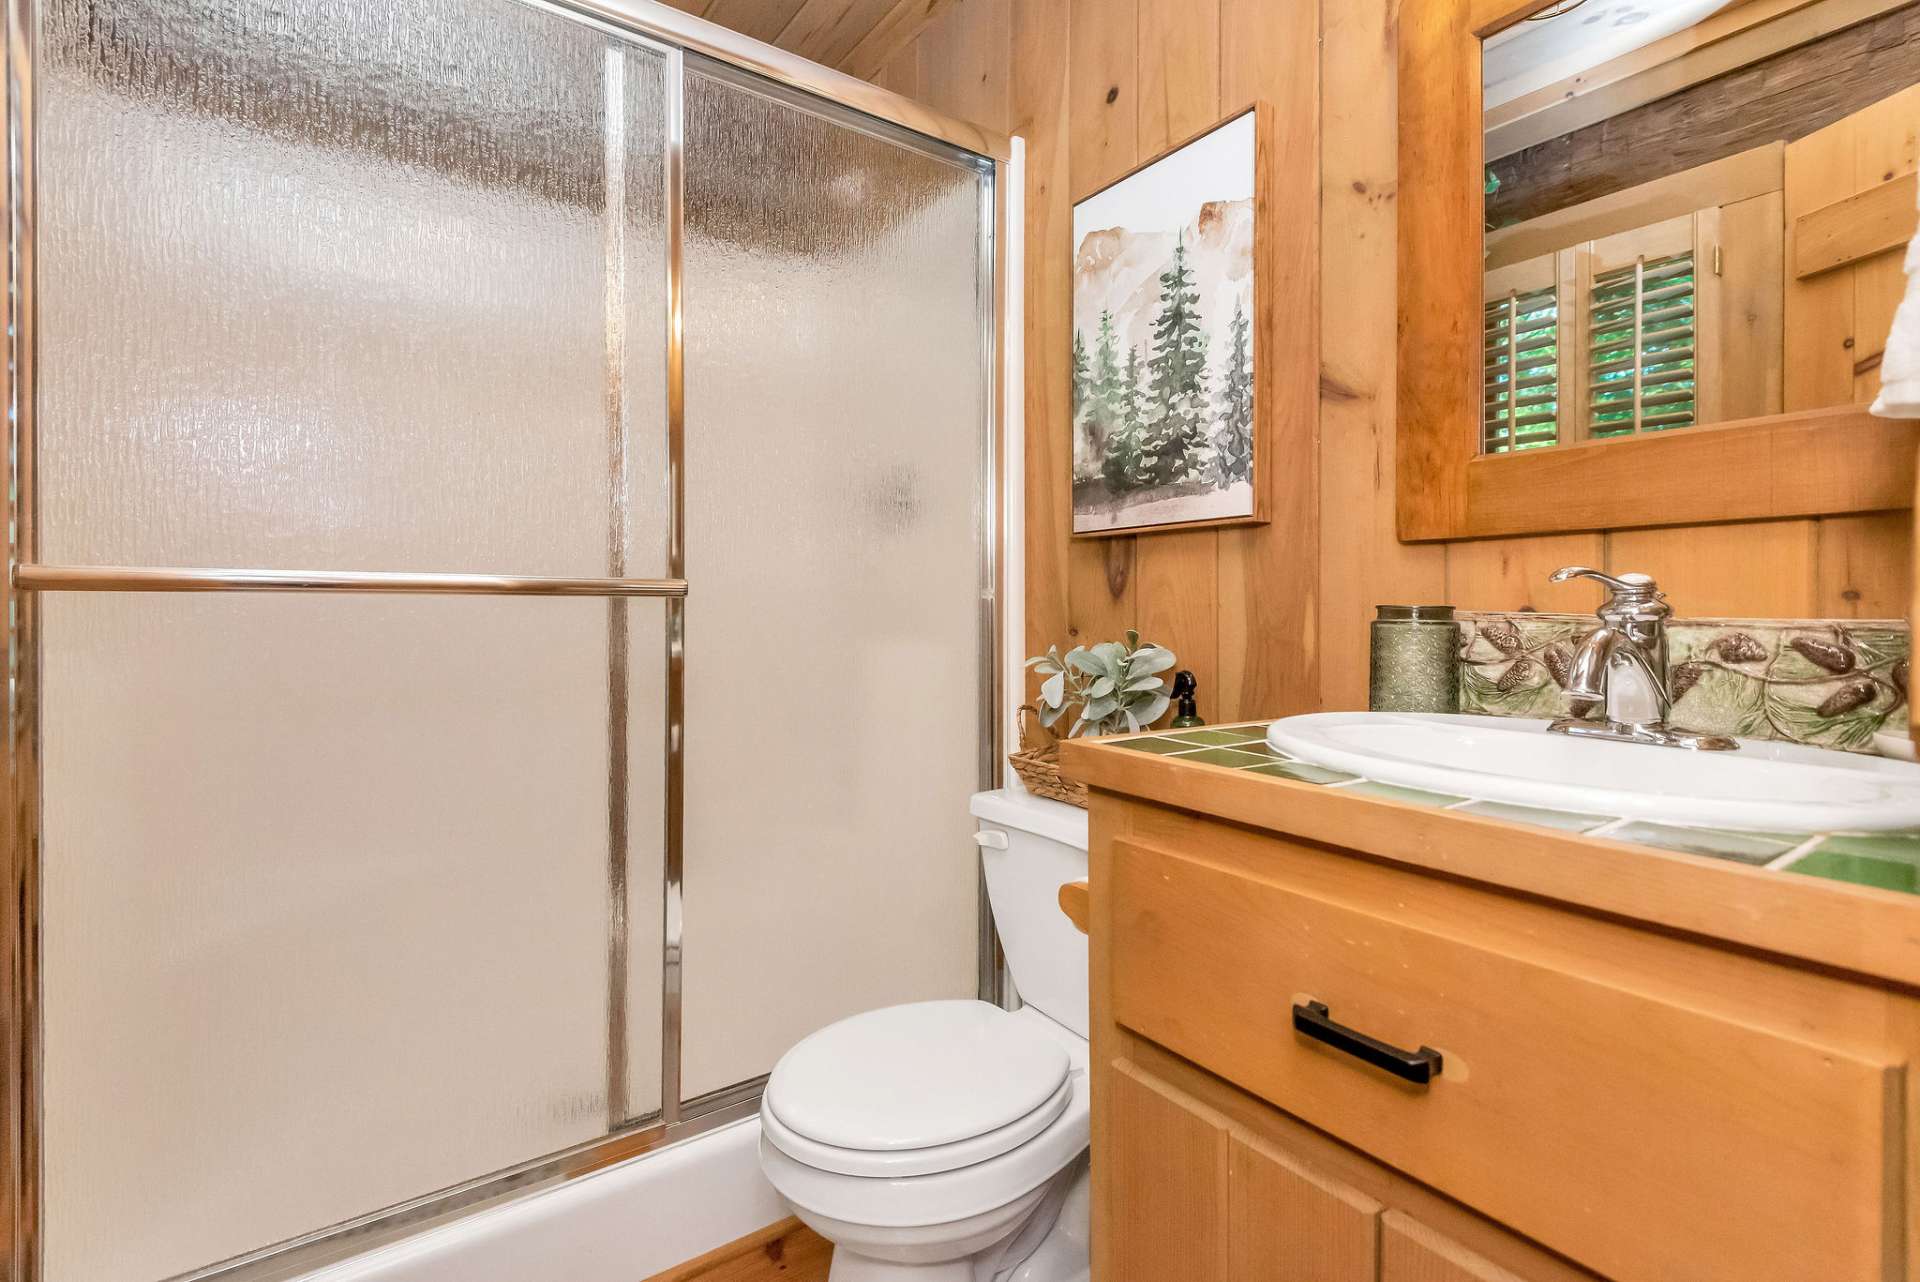 This bath is on the main level off of the kitchen area and has an easy step-in shower.